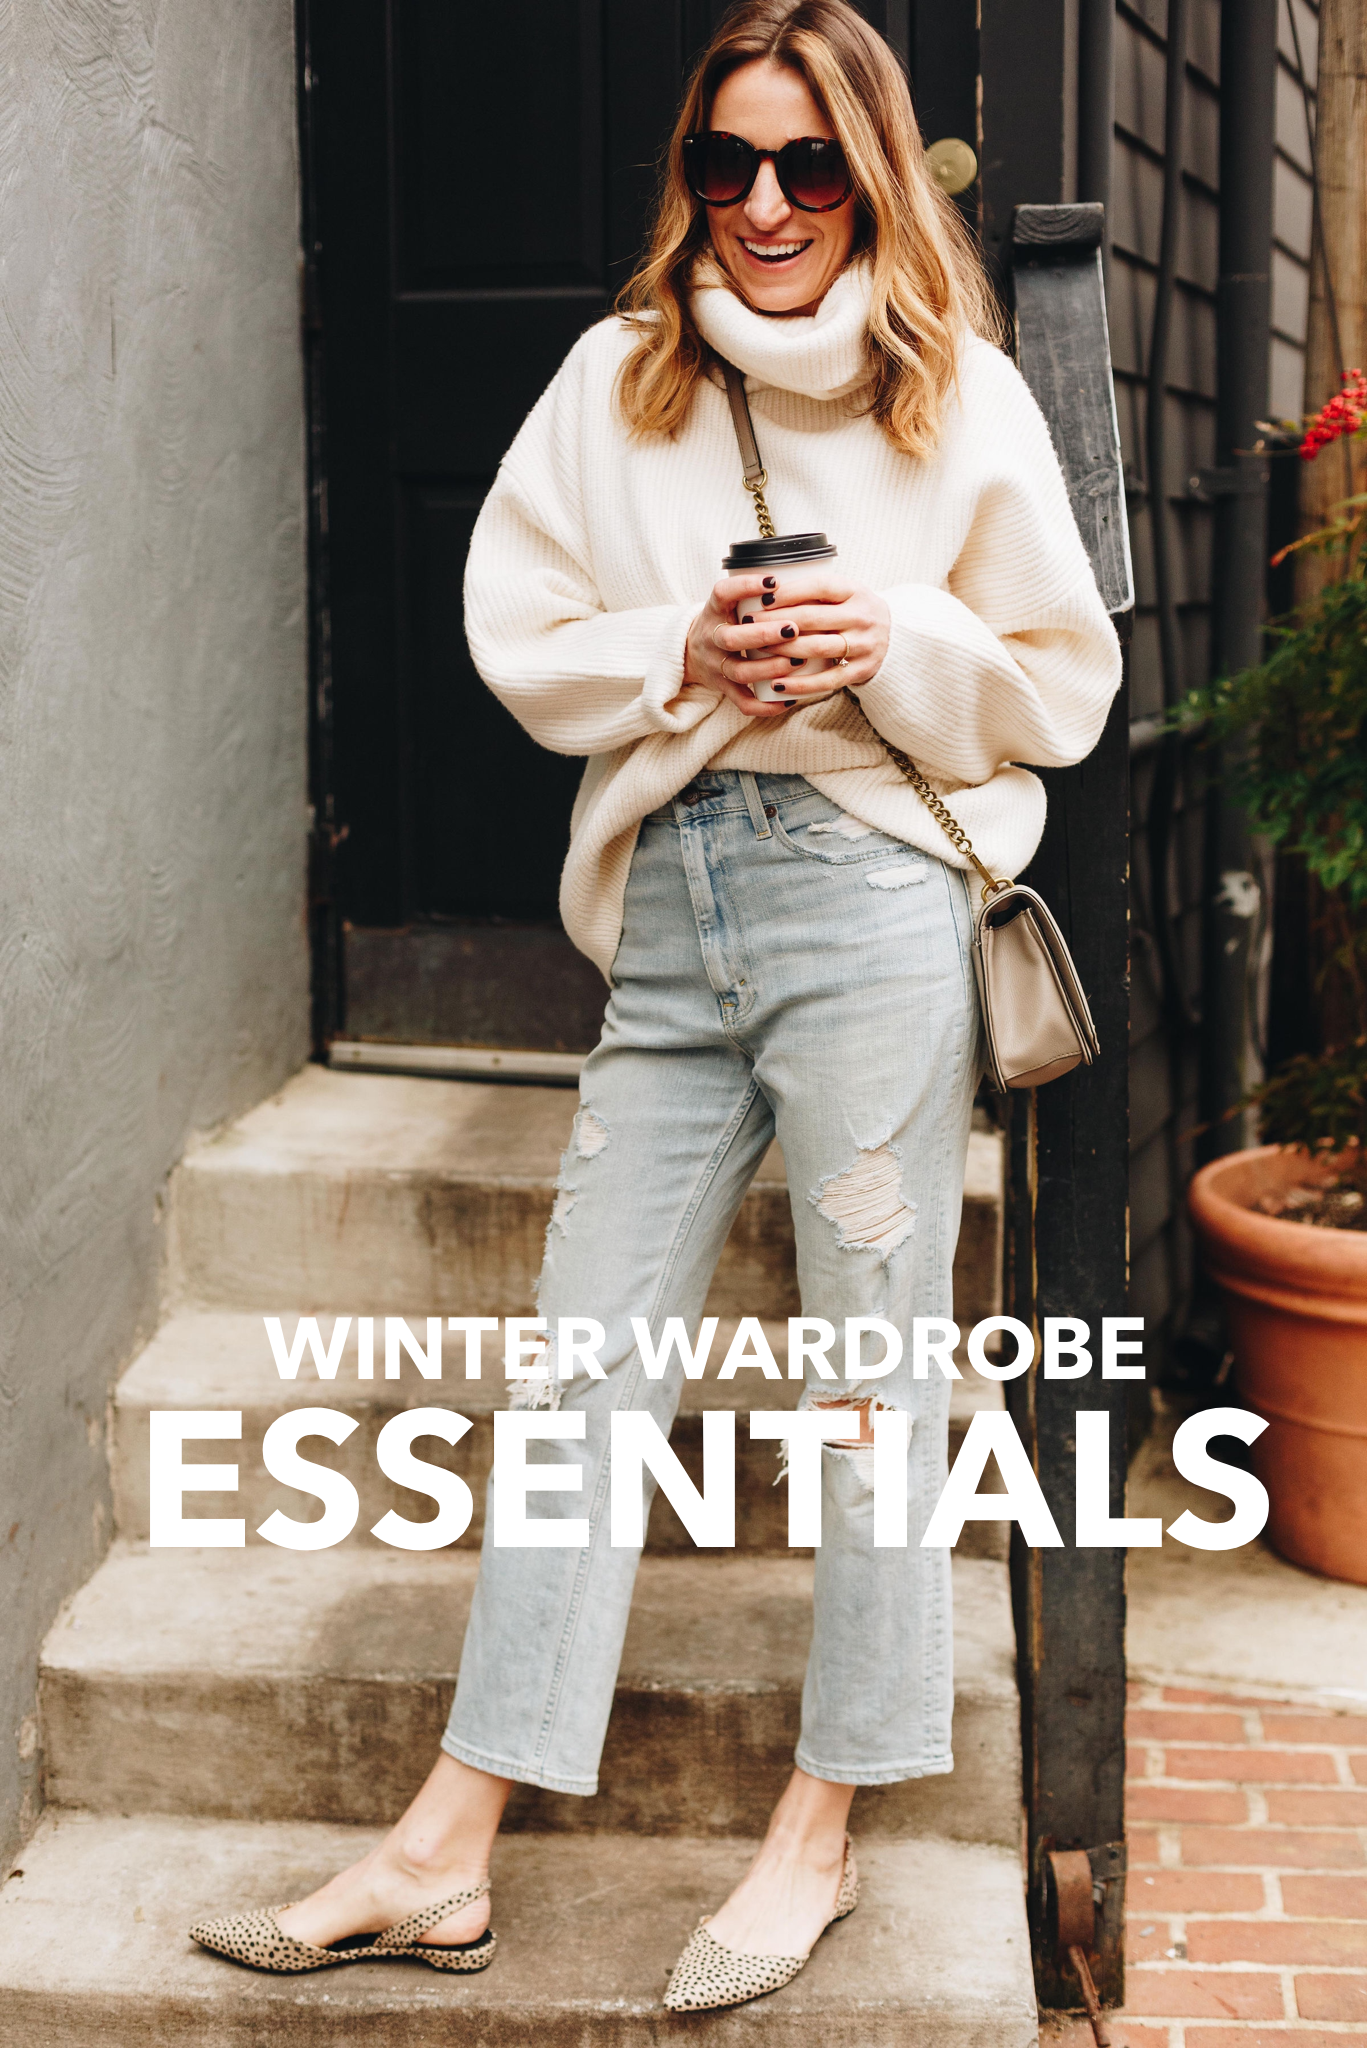 Winter Wardrobe Essentials For Moms - The Mama Notes